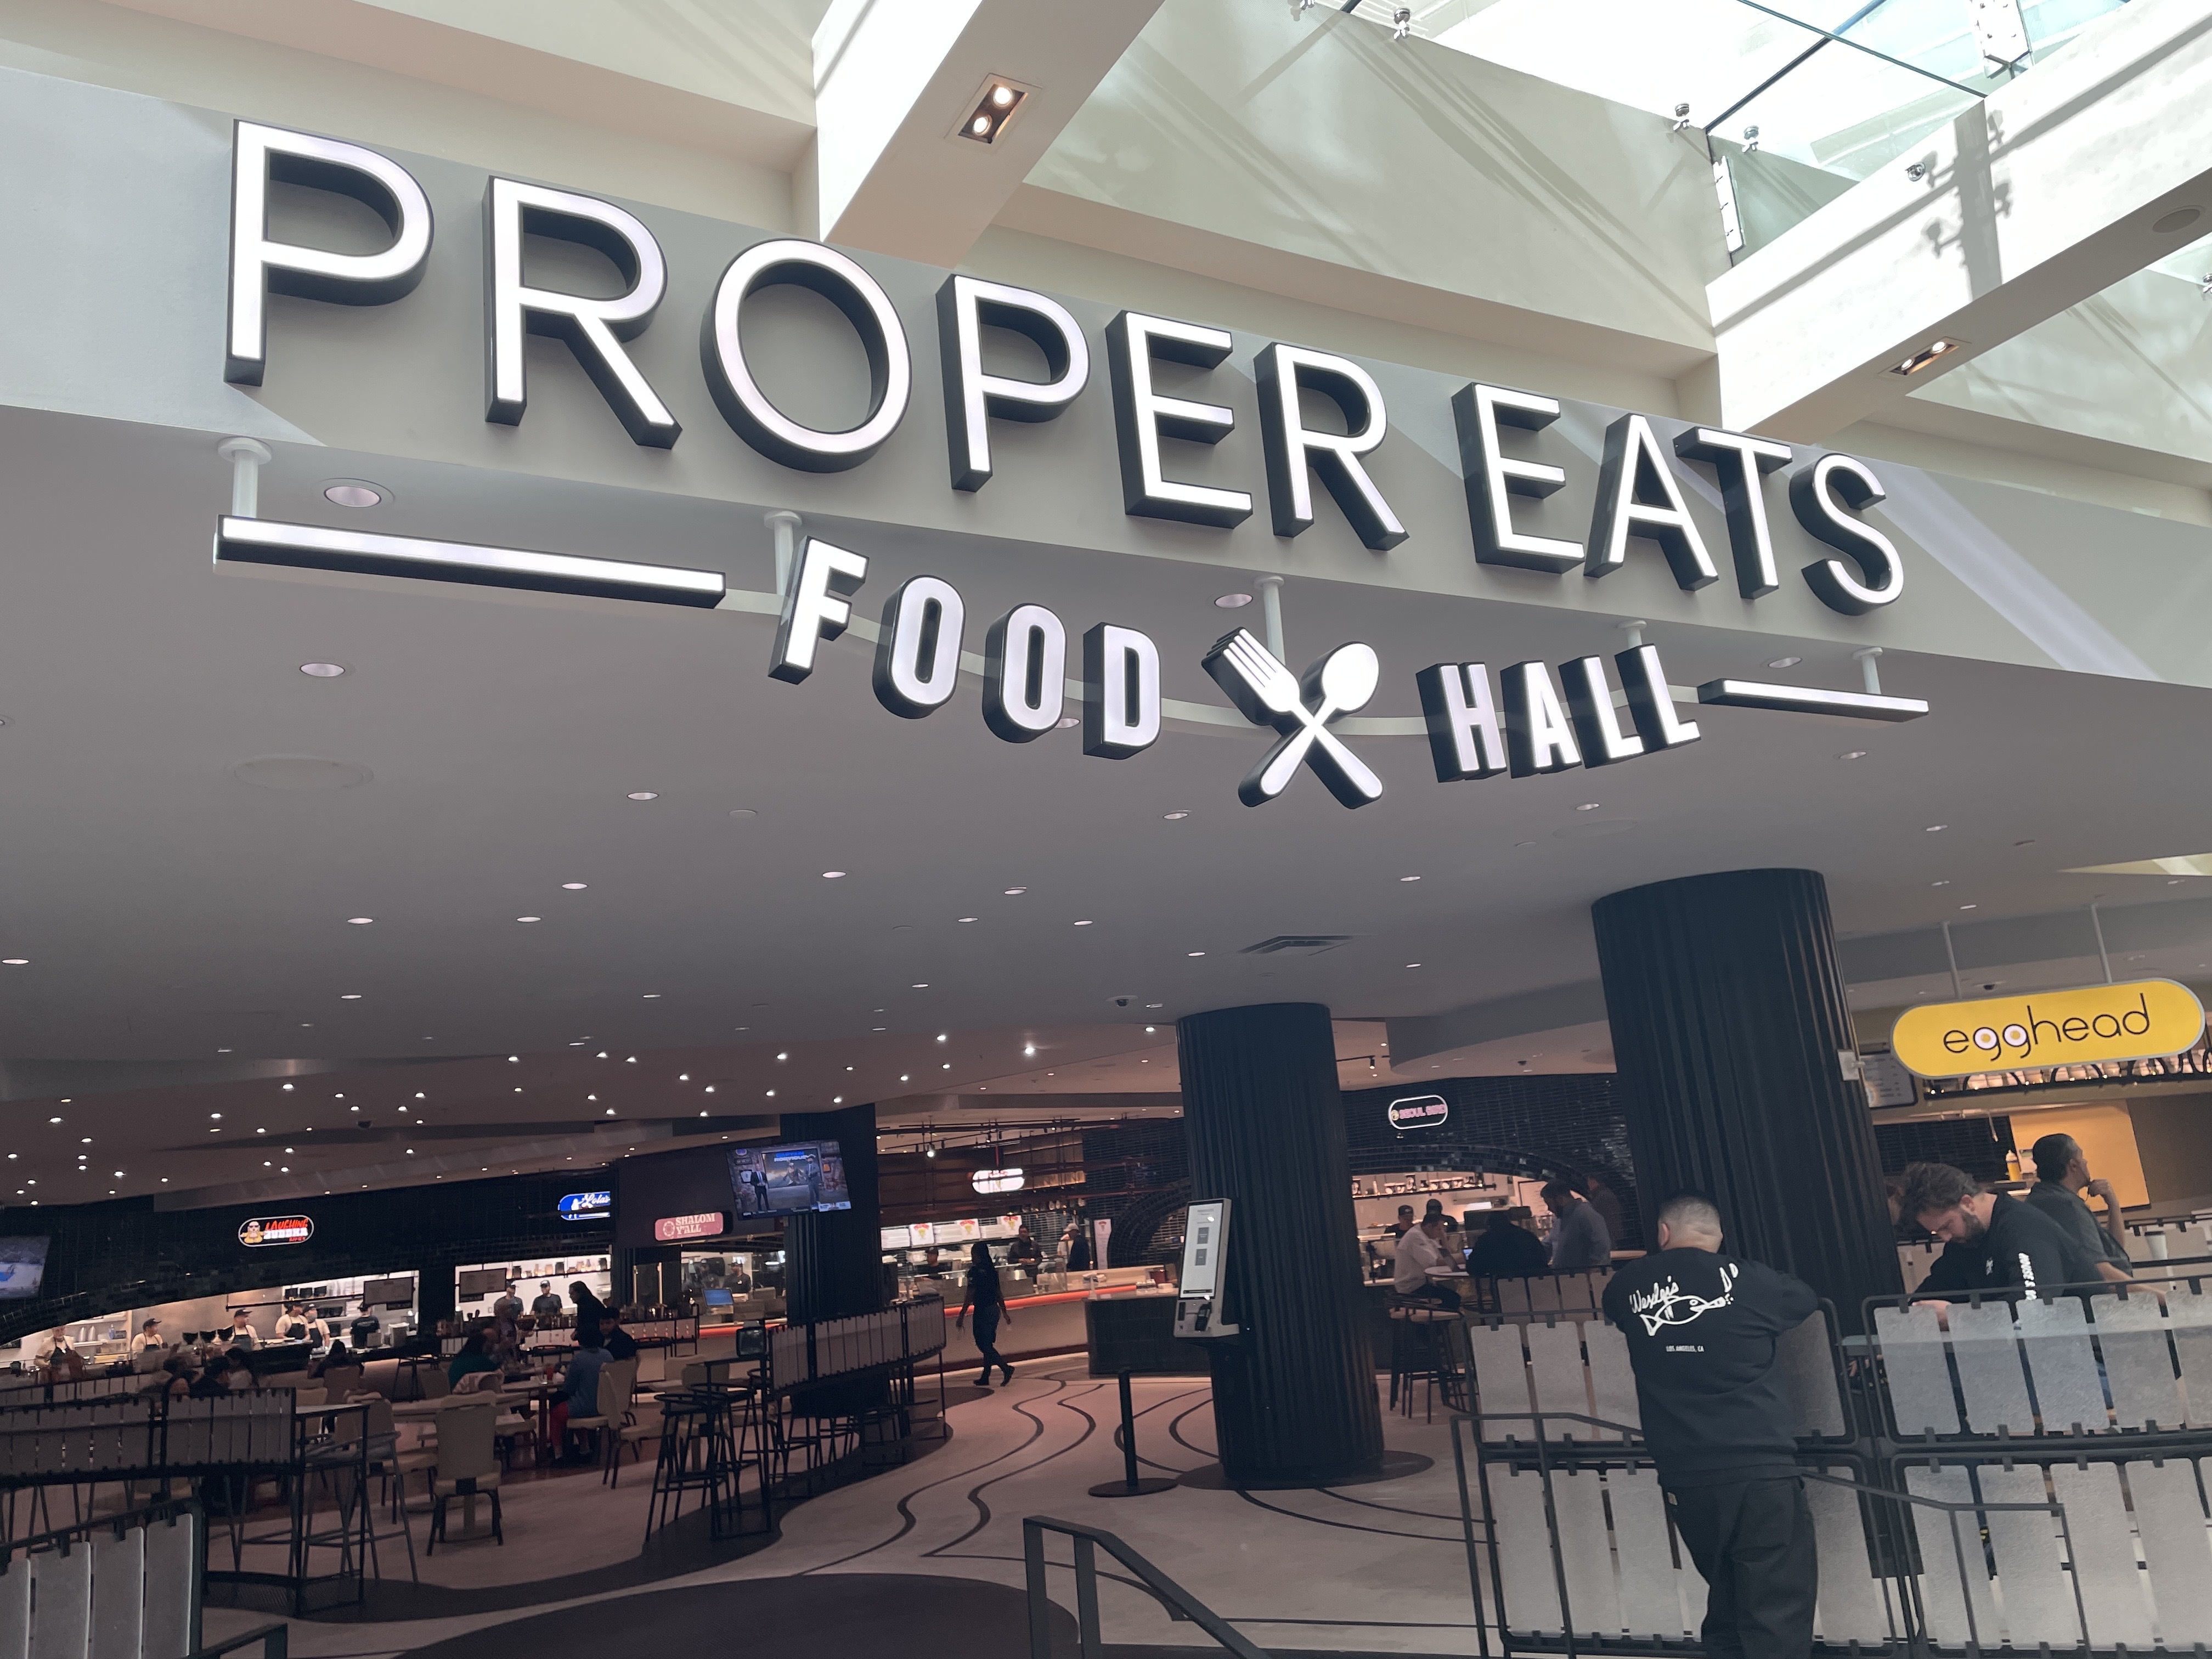 The exterior of the Proper Eats Food Hall.